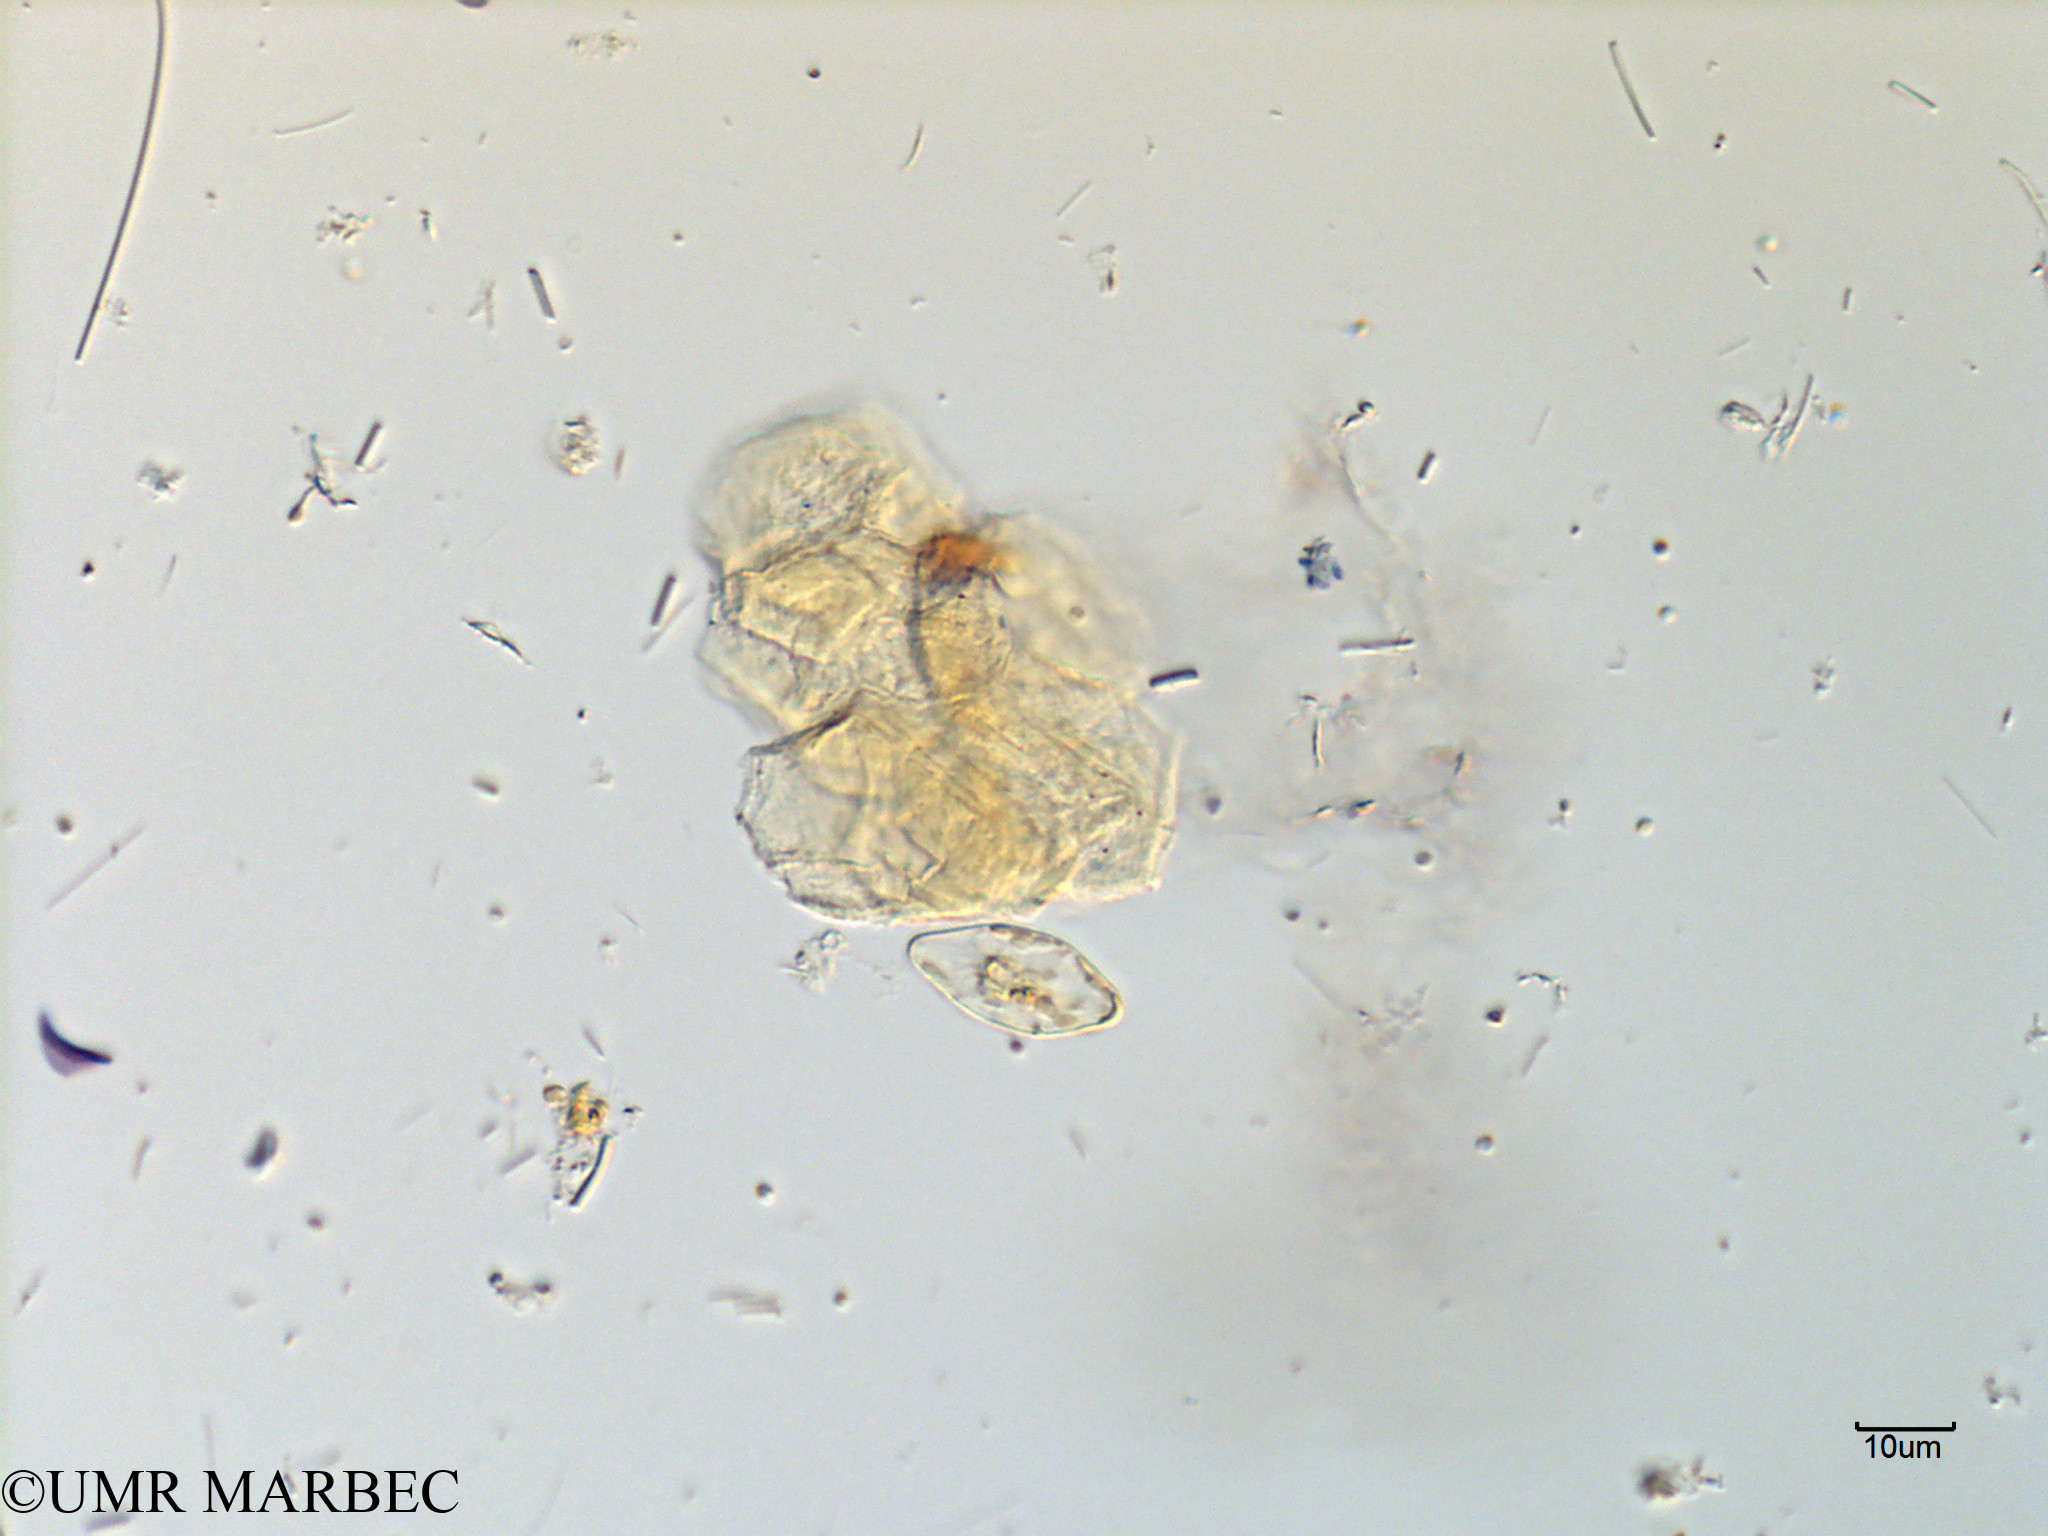 phyto/Scattered_Islands/mayotte_lagoon/SIREME May 2016/Gomphonema sp1 (MAY10_pennee laquelle c-4).tif(copy).jpg